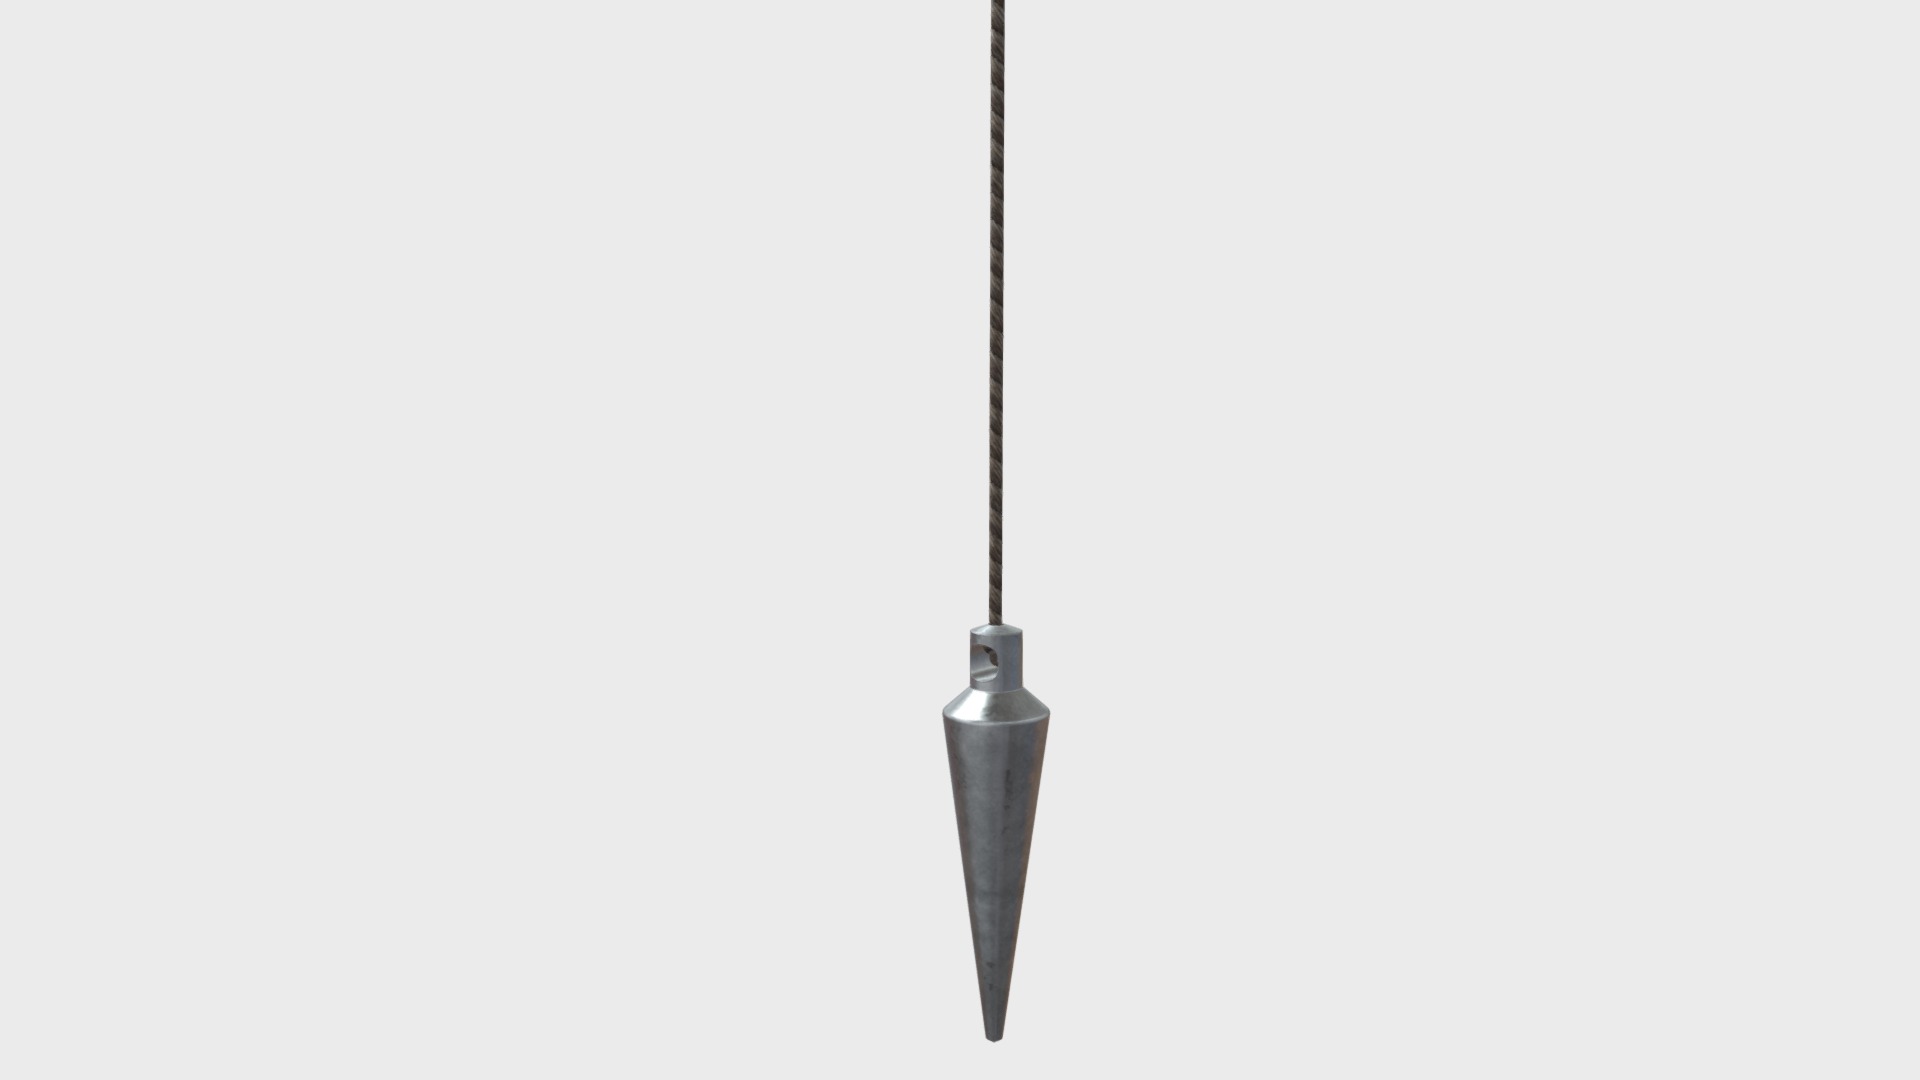 3D model Plumb bob - This is a 3D model of the Plumb bob. The 3D model is about a black cylindrical object with a black handle.